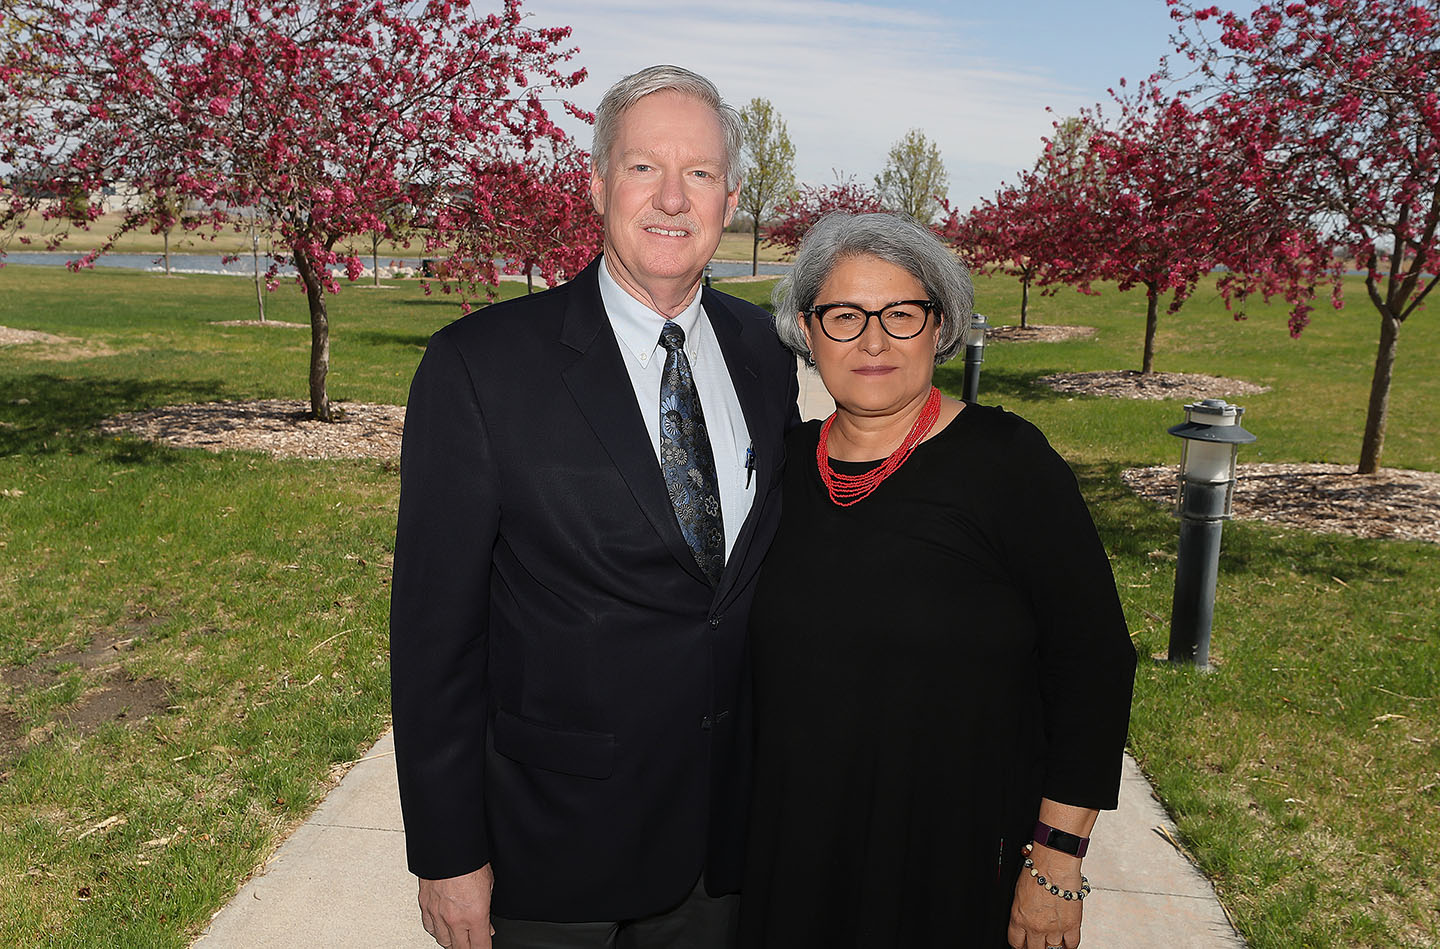 Tom Tye and his wife Mikki pose for a photo at Yanney Heritage Park in Kearney. Tye has been involved in the park’s development since Day 1.